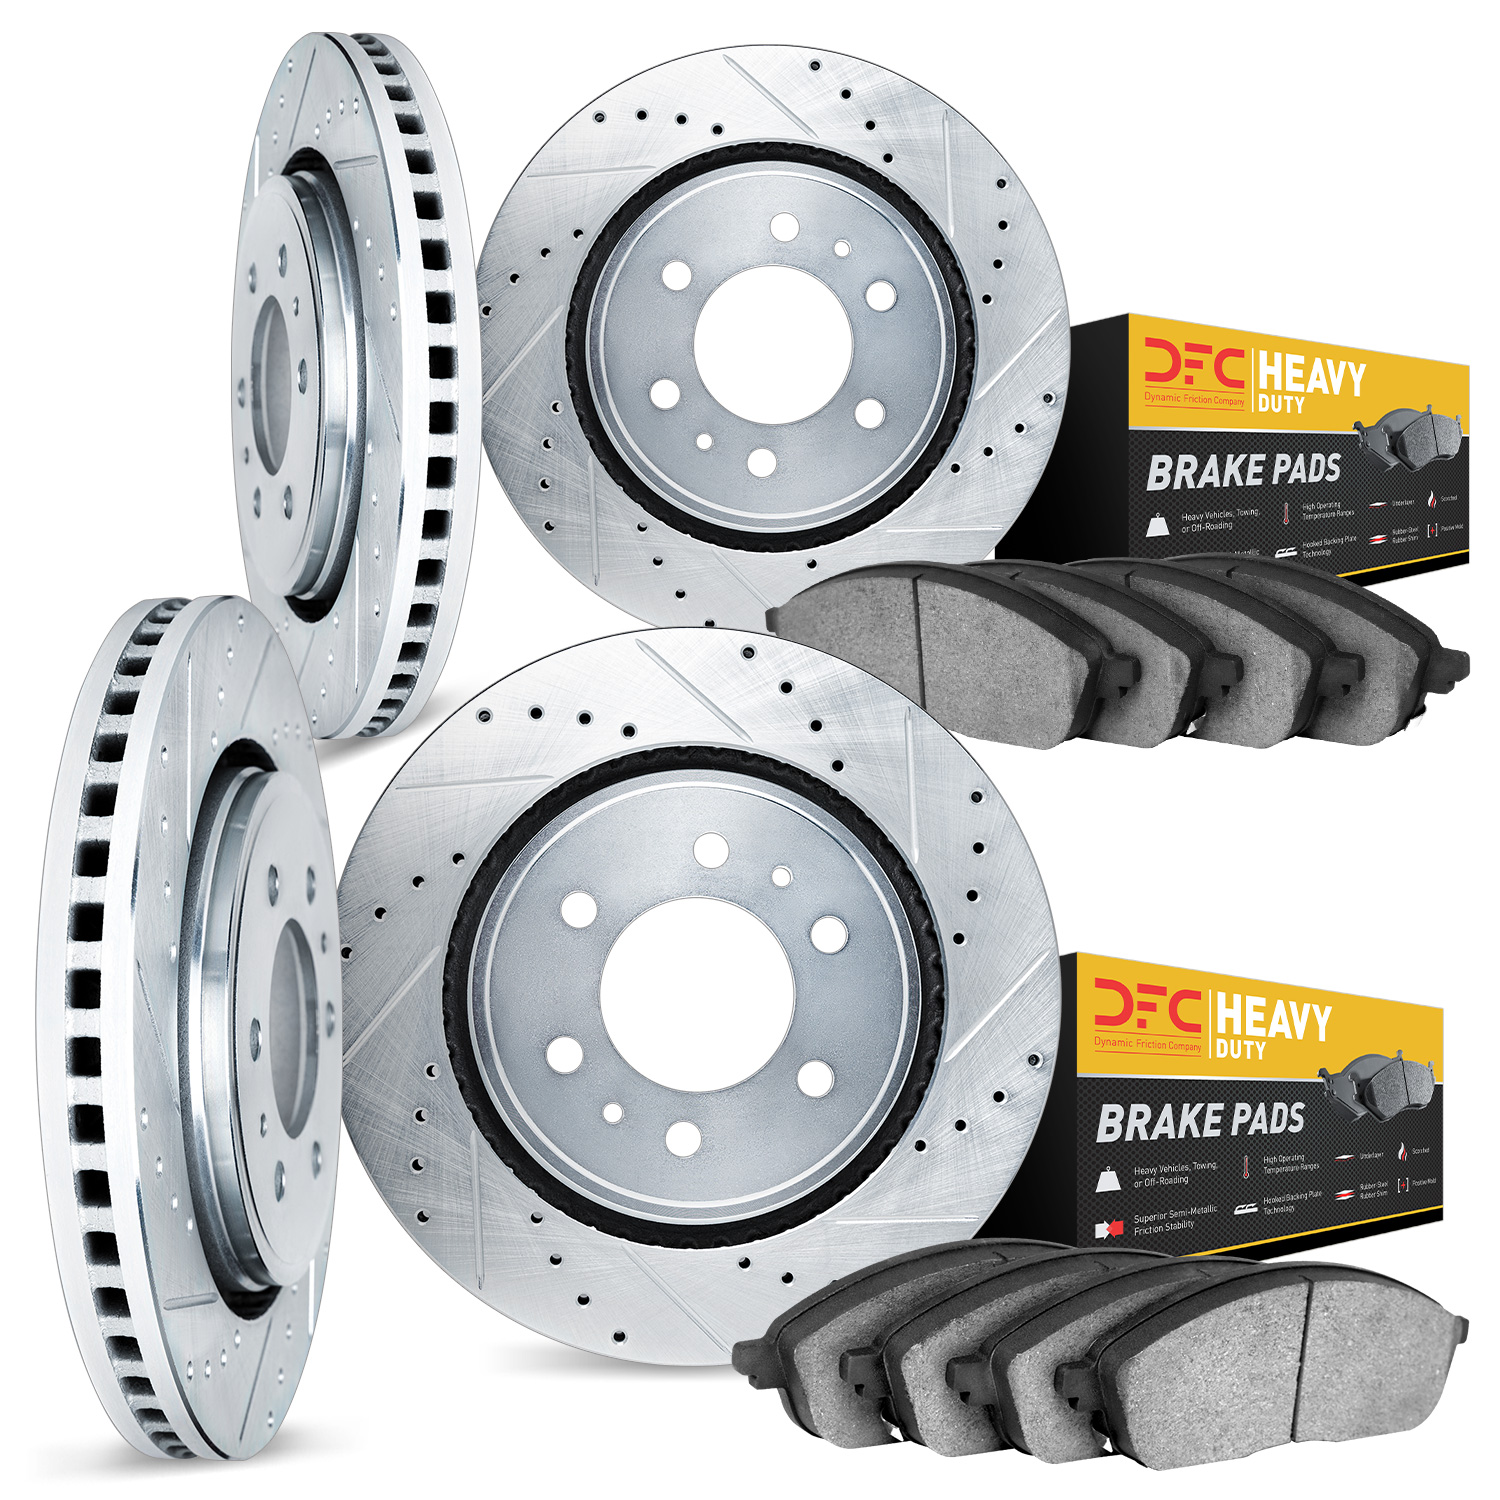 7204-44001 Drilled/Slotted Rotors w/Heavy-Duty Brake Pads Kit [Silver], 1996-2006 Mopar, Position: Front and Rear